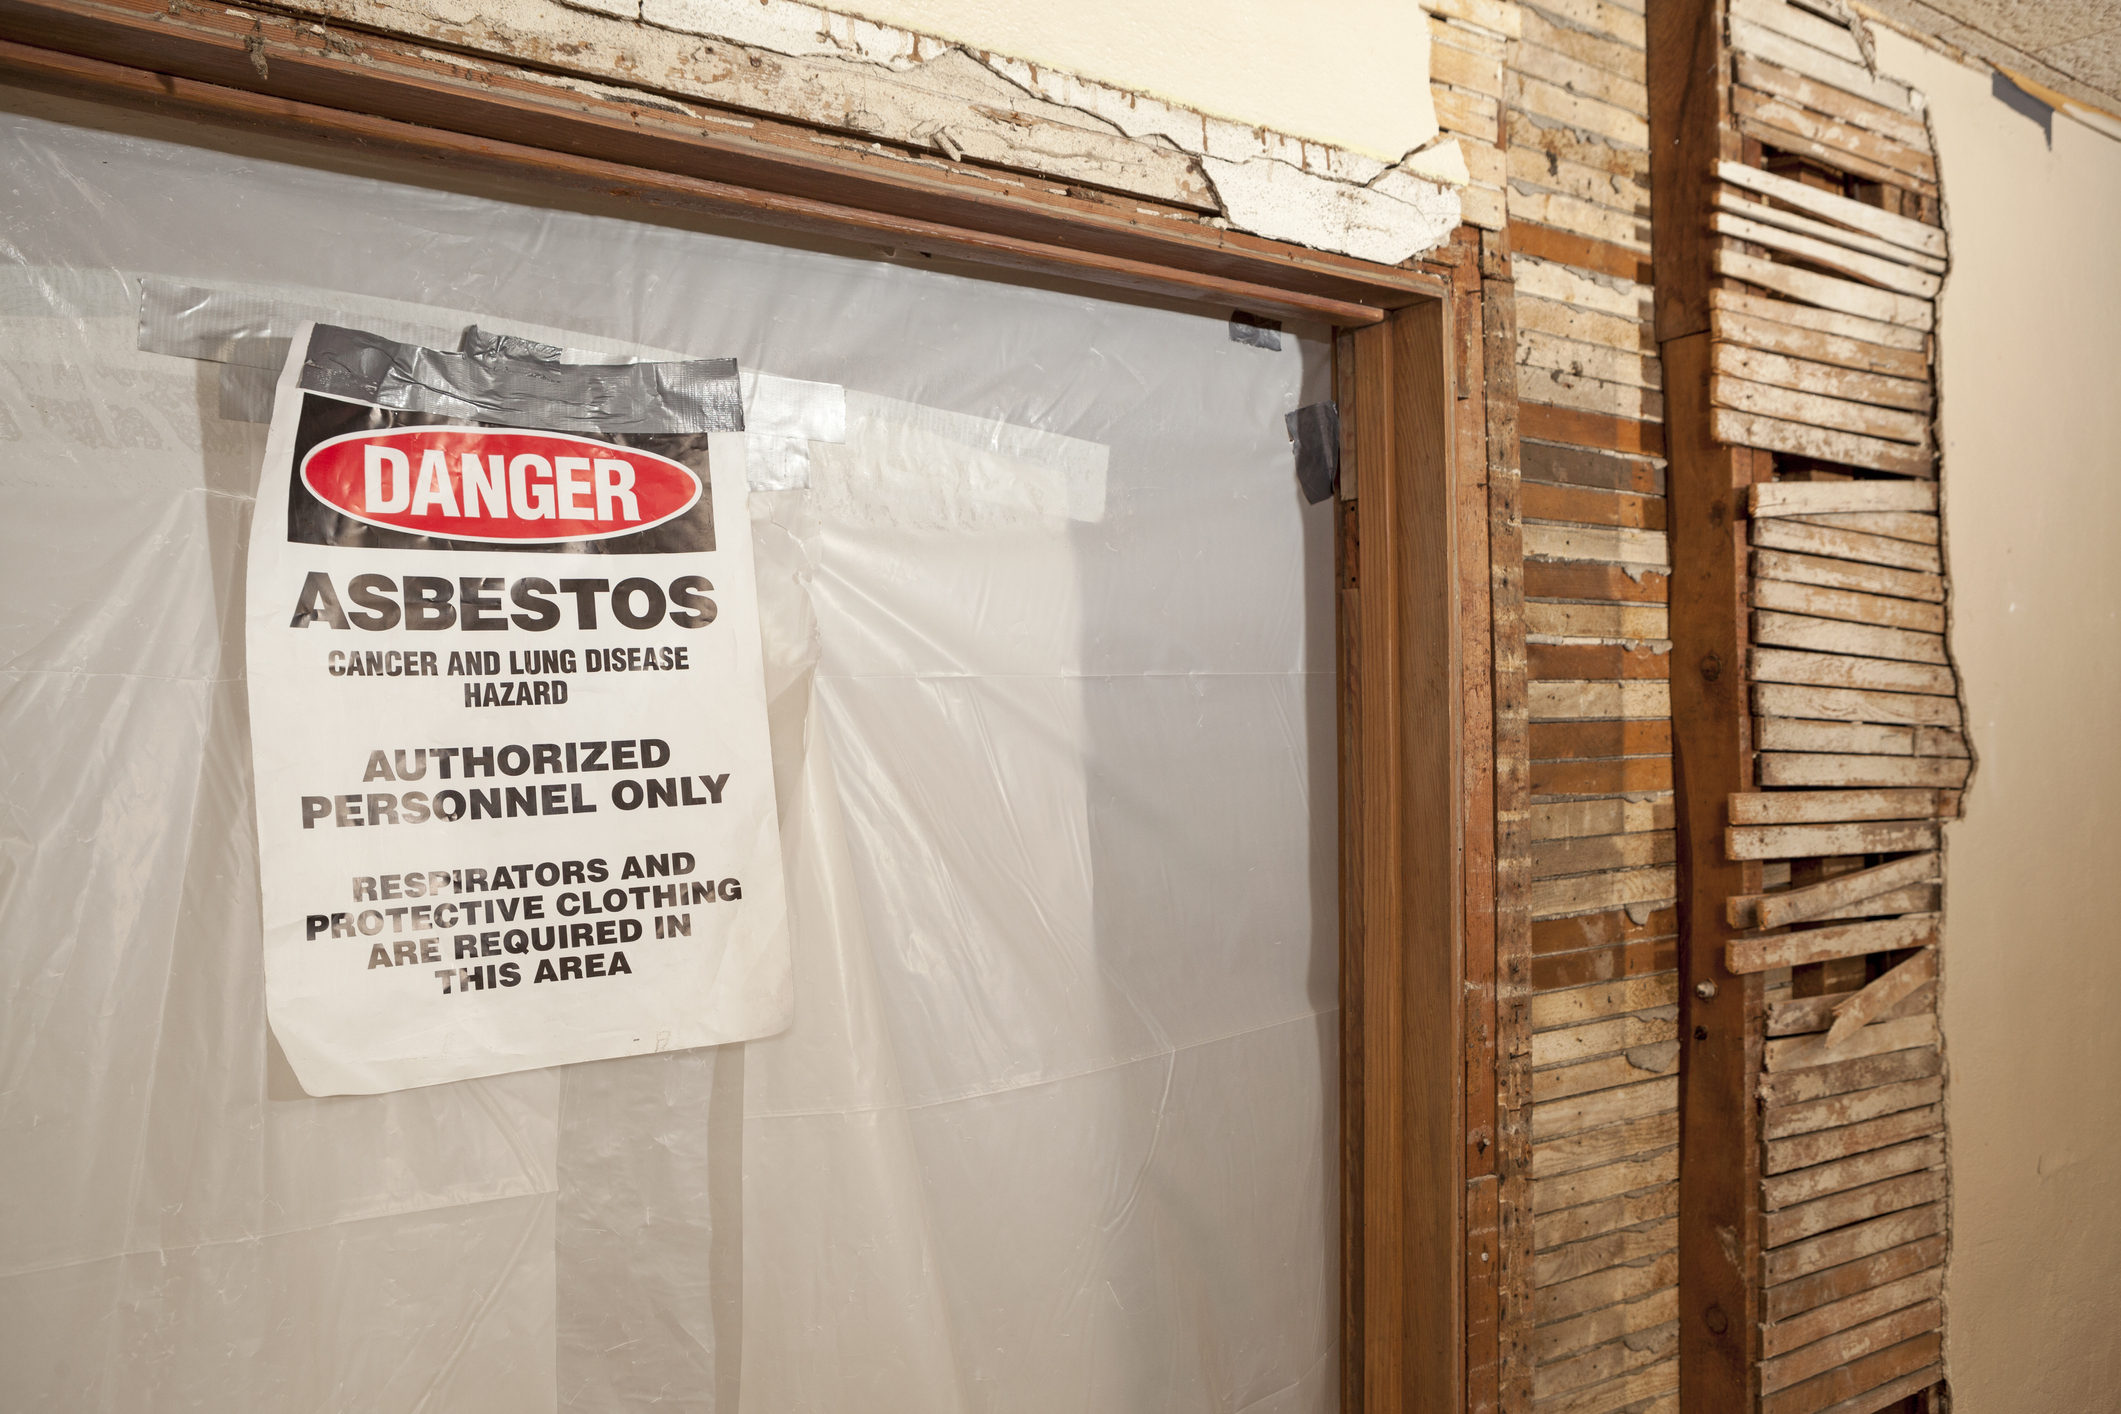 What to do if I’m Exposed to Asbestos?